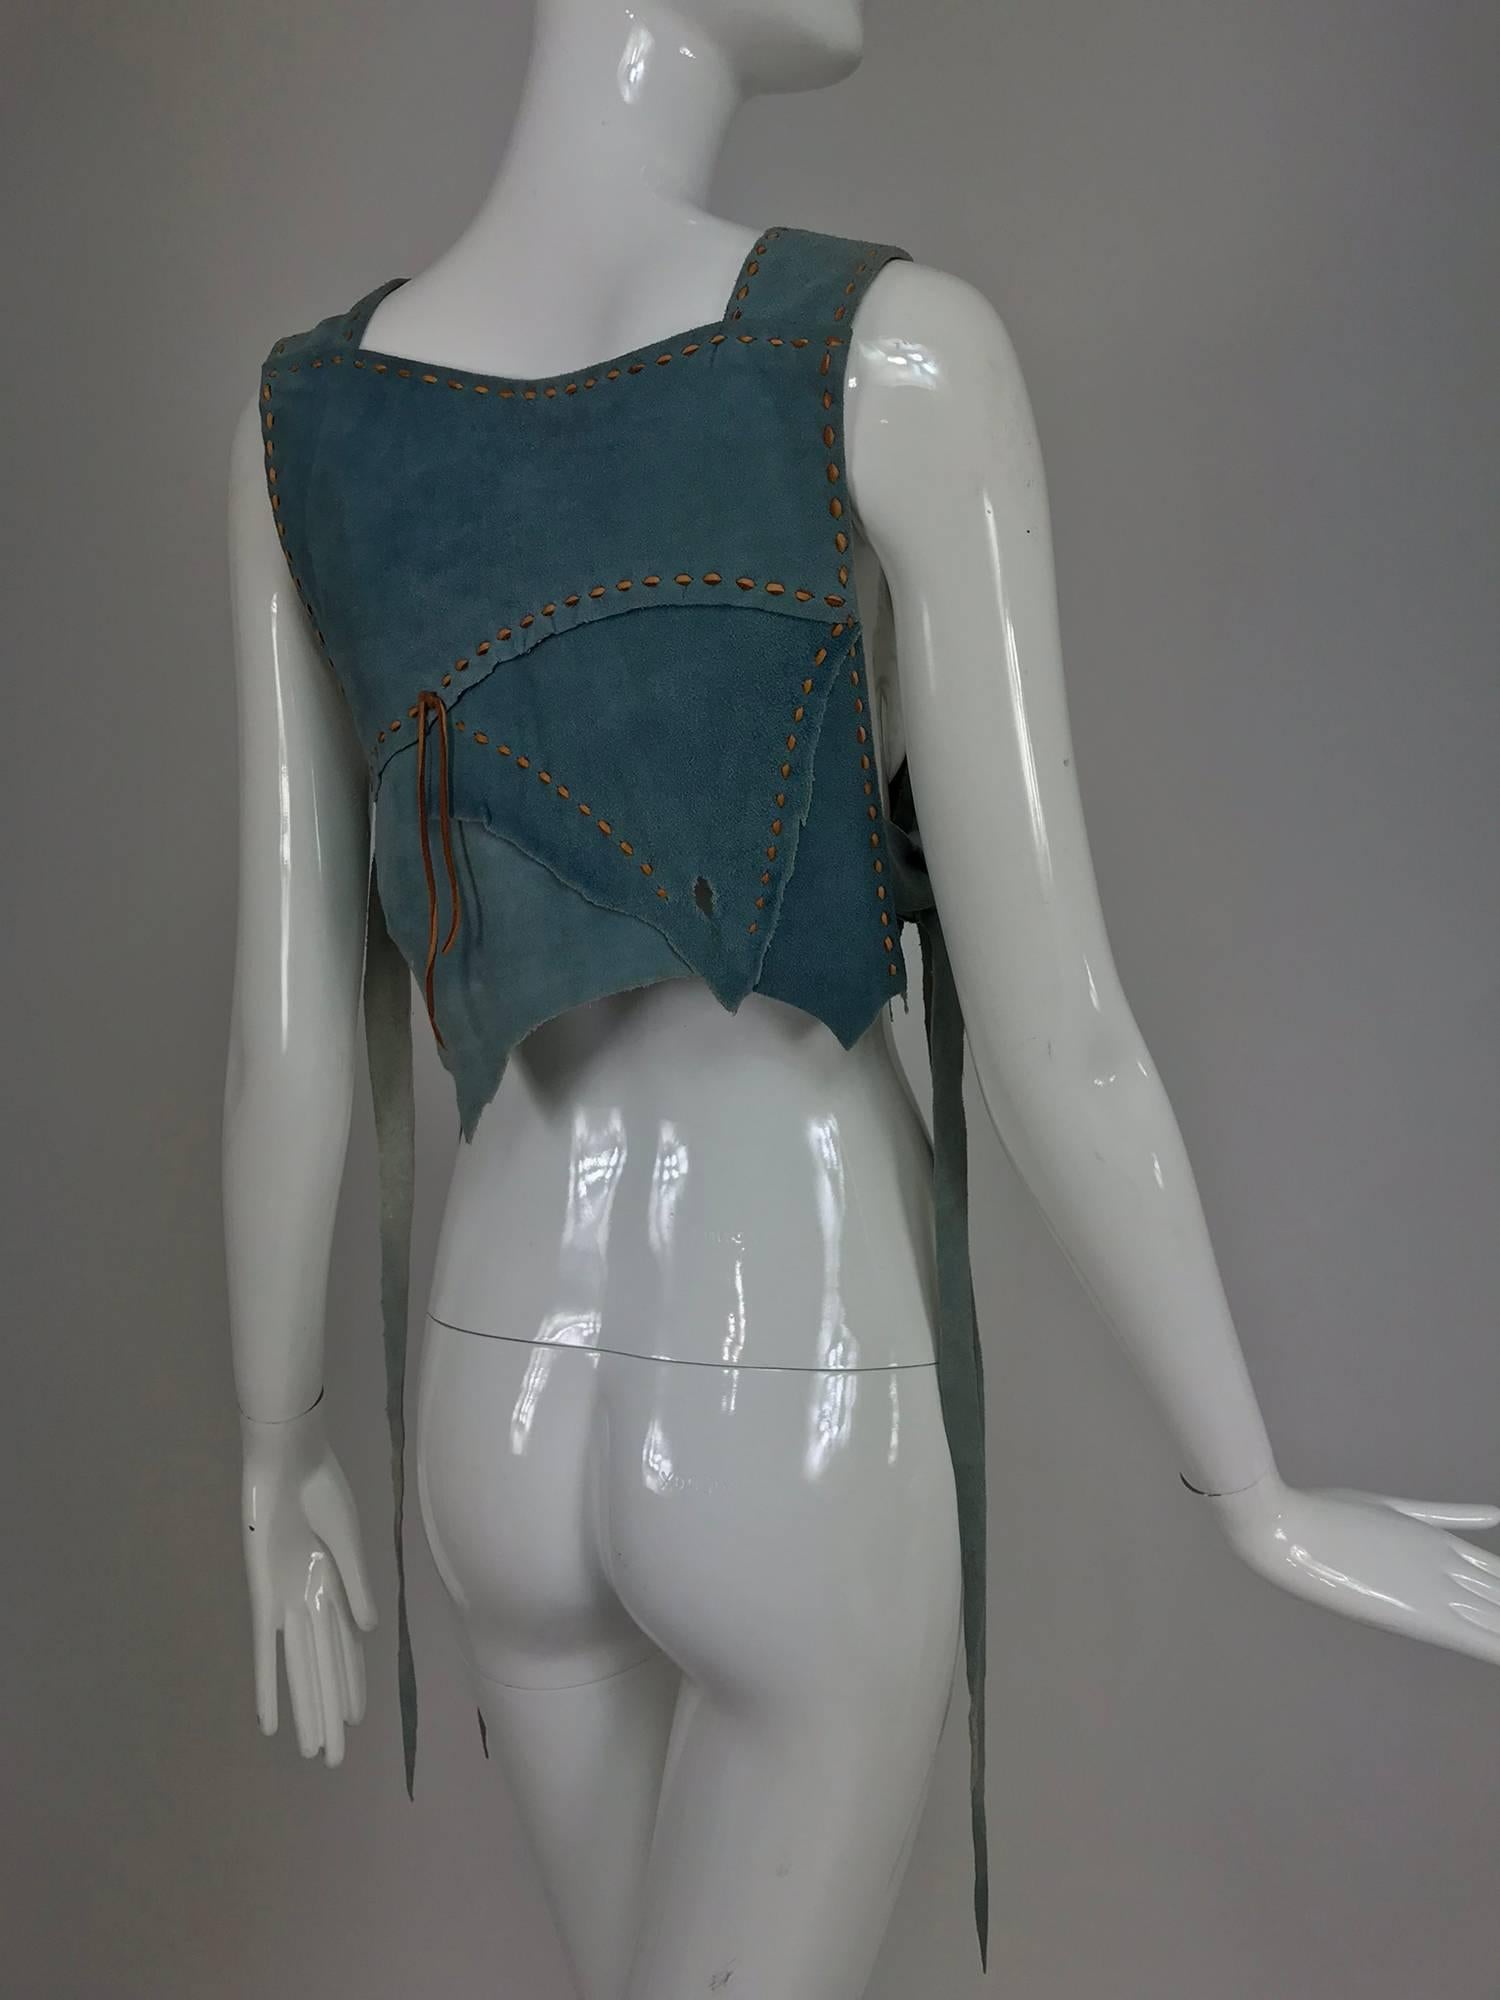 Women's Cher's laced blue suede and leather stars applique halter top, 1960s